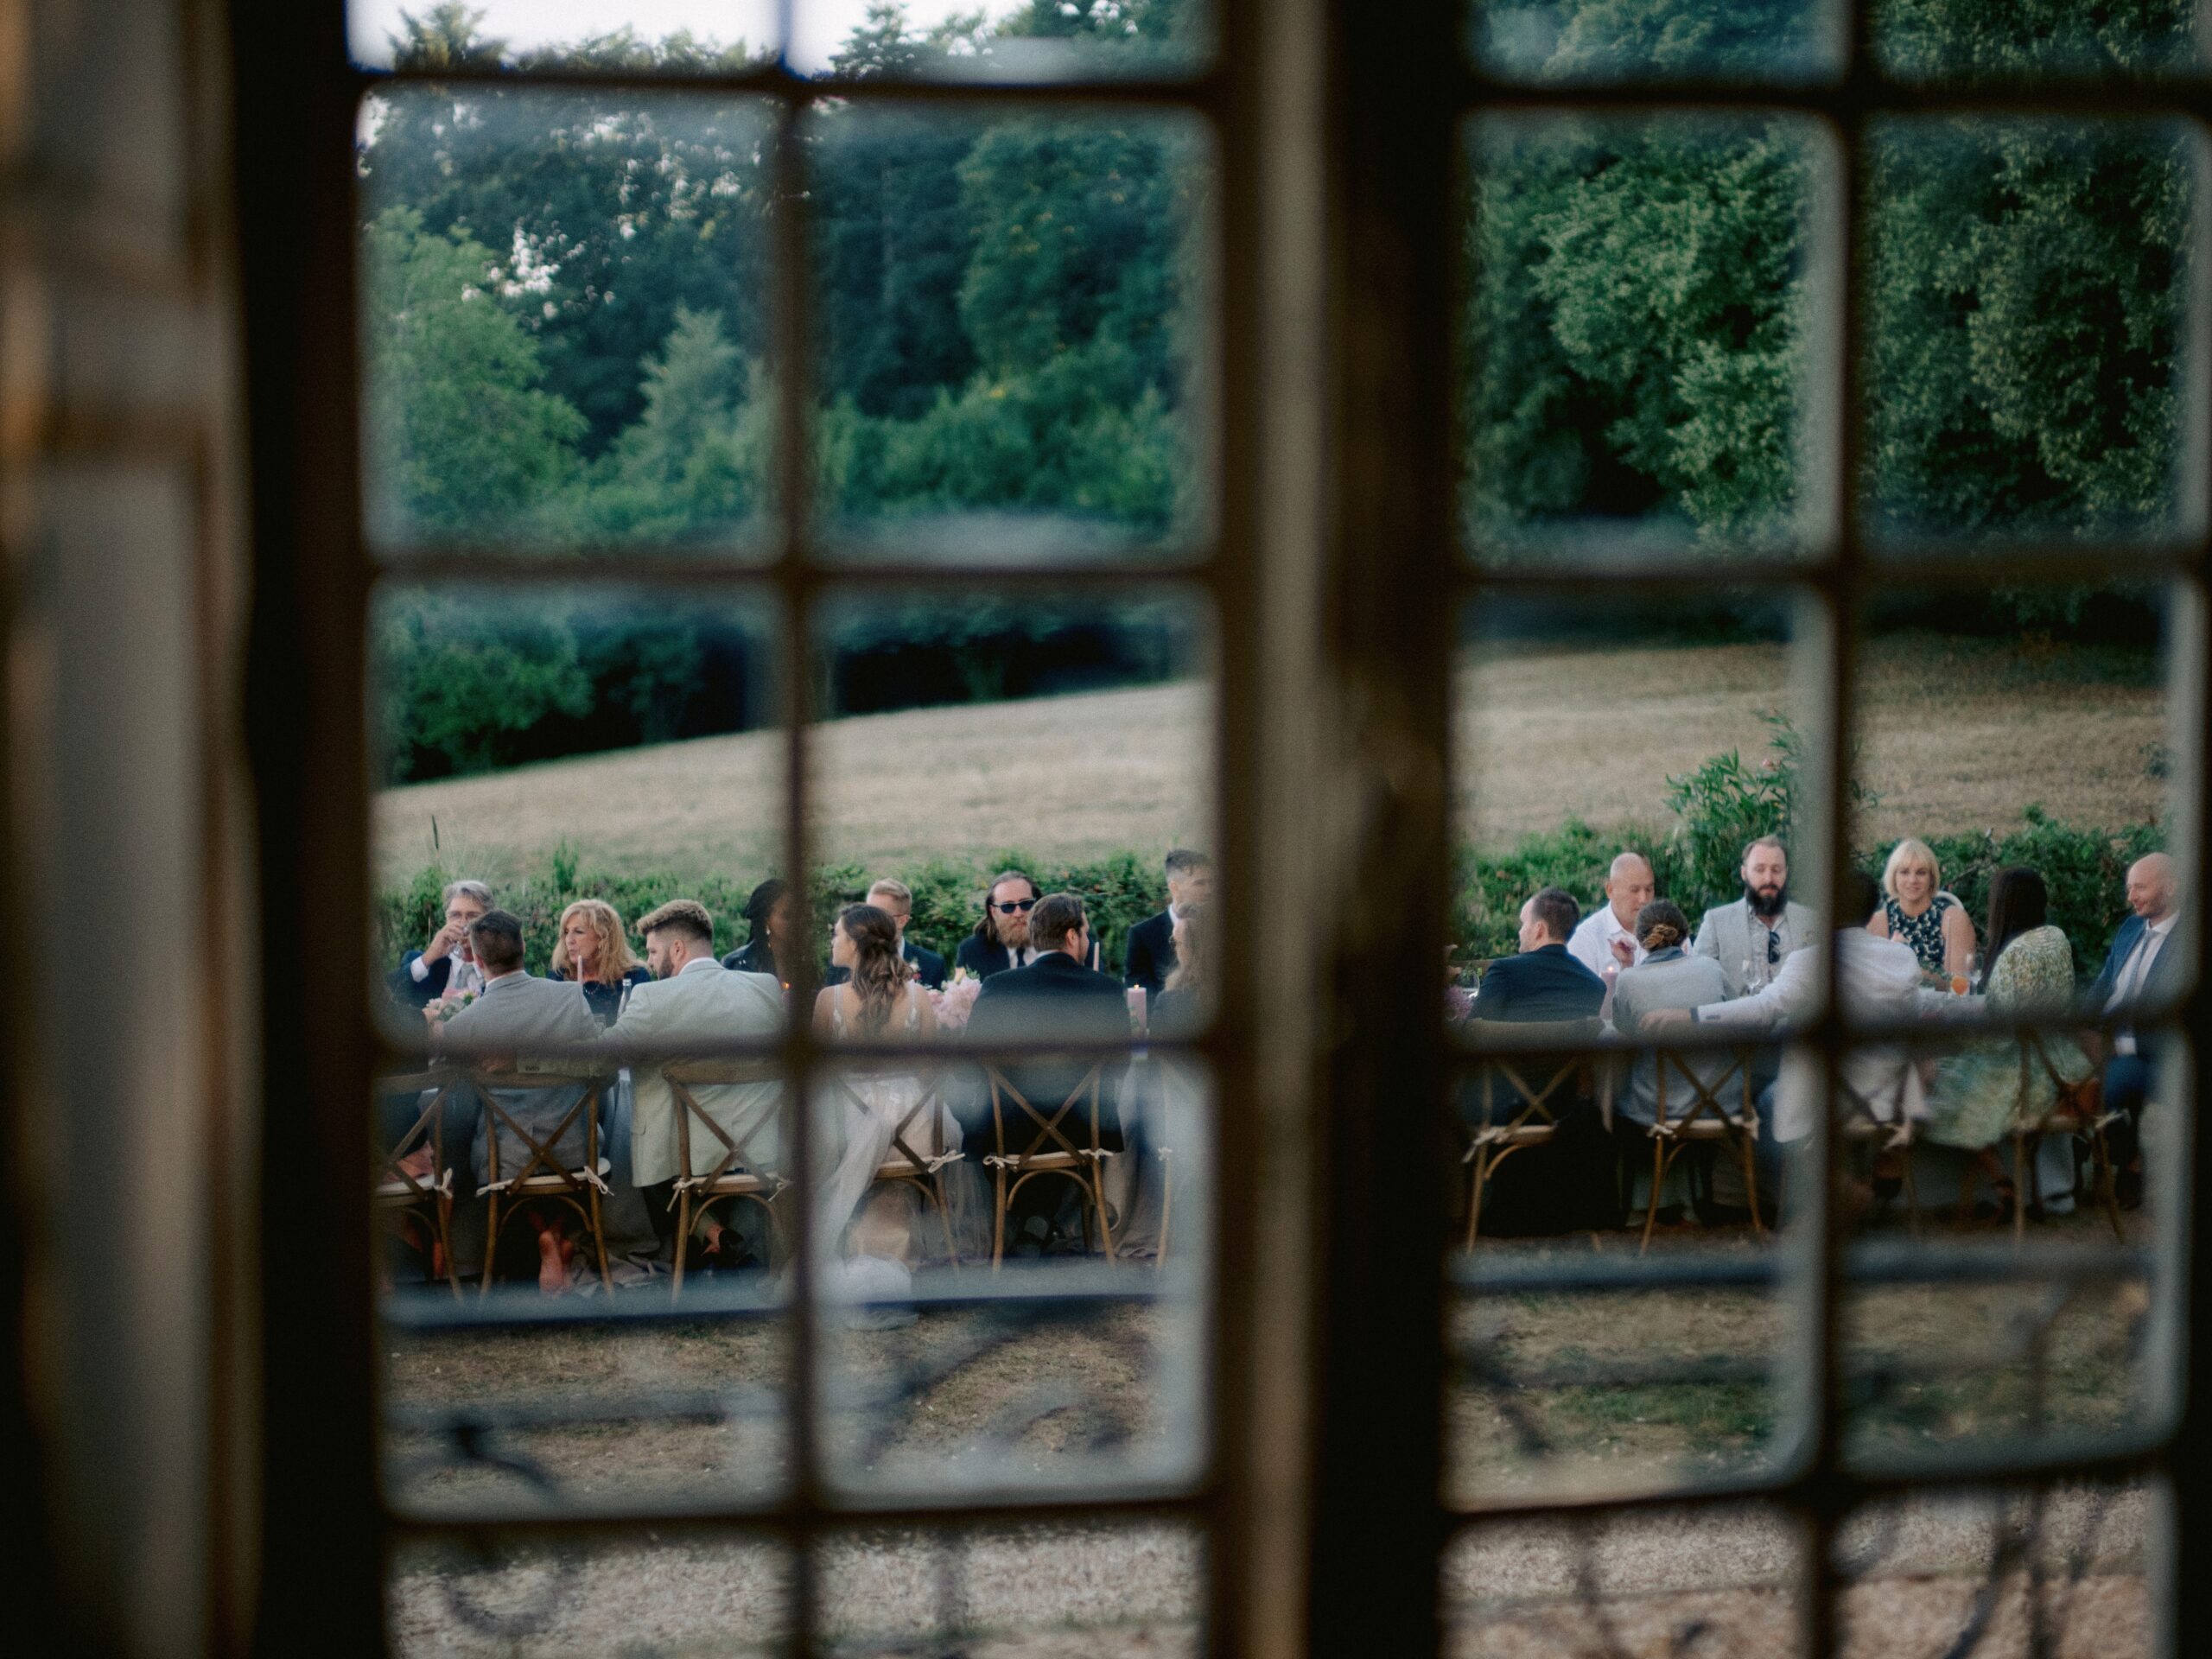 A view of a wedding reception from inside the window. Photo by Jenny Fu Studio